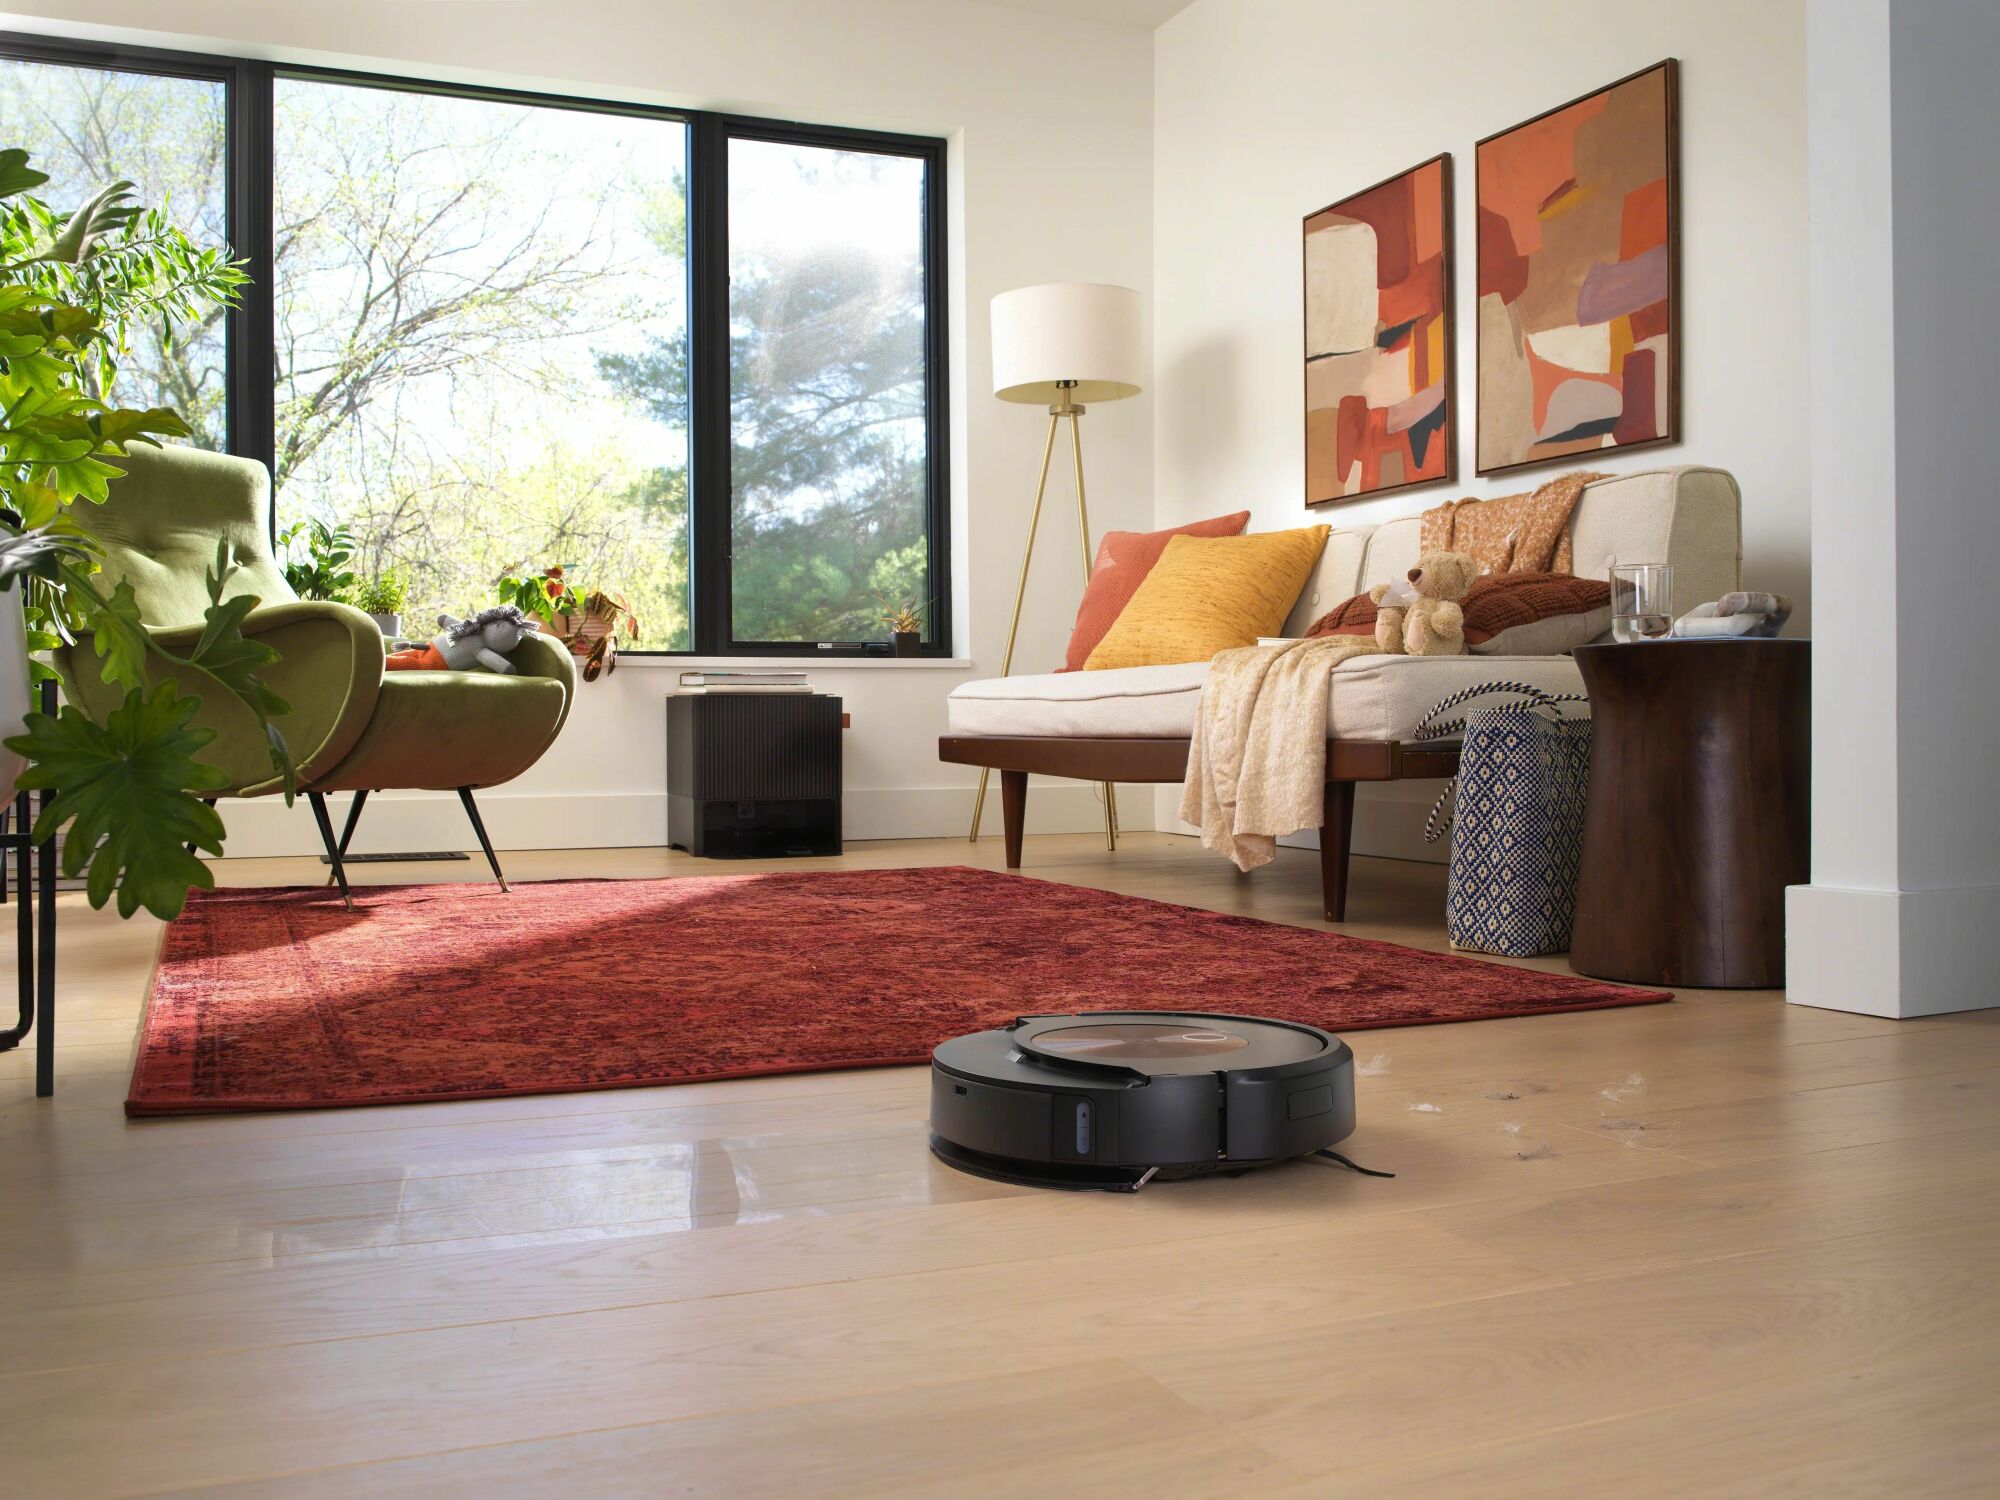 Roomba mopping hardwood floor with living room furniture in background